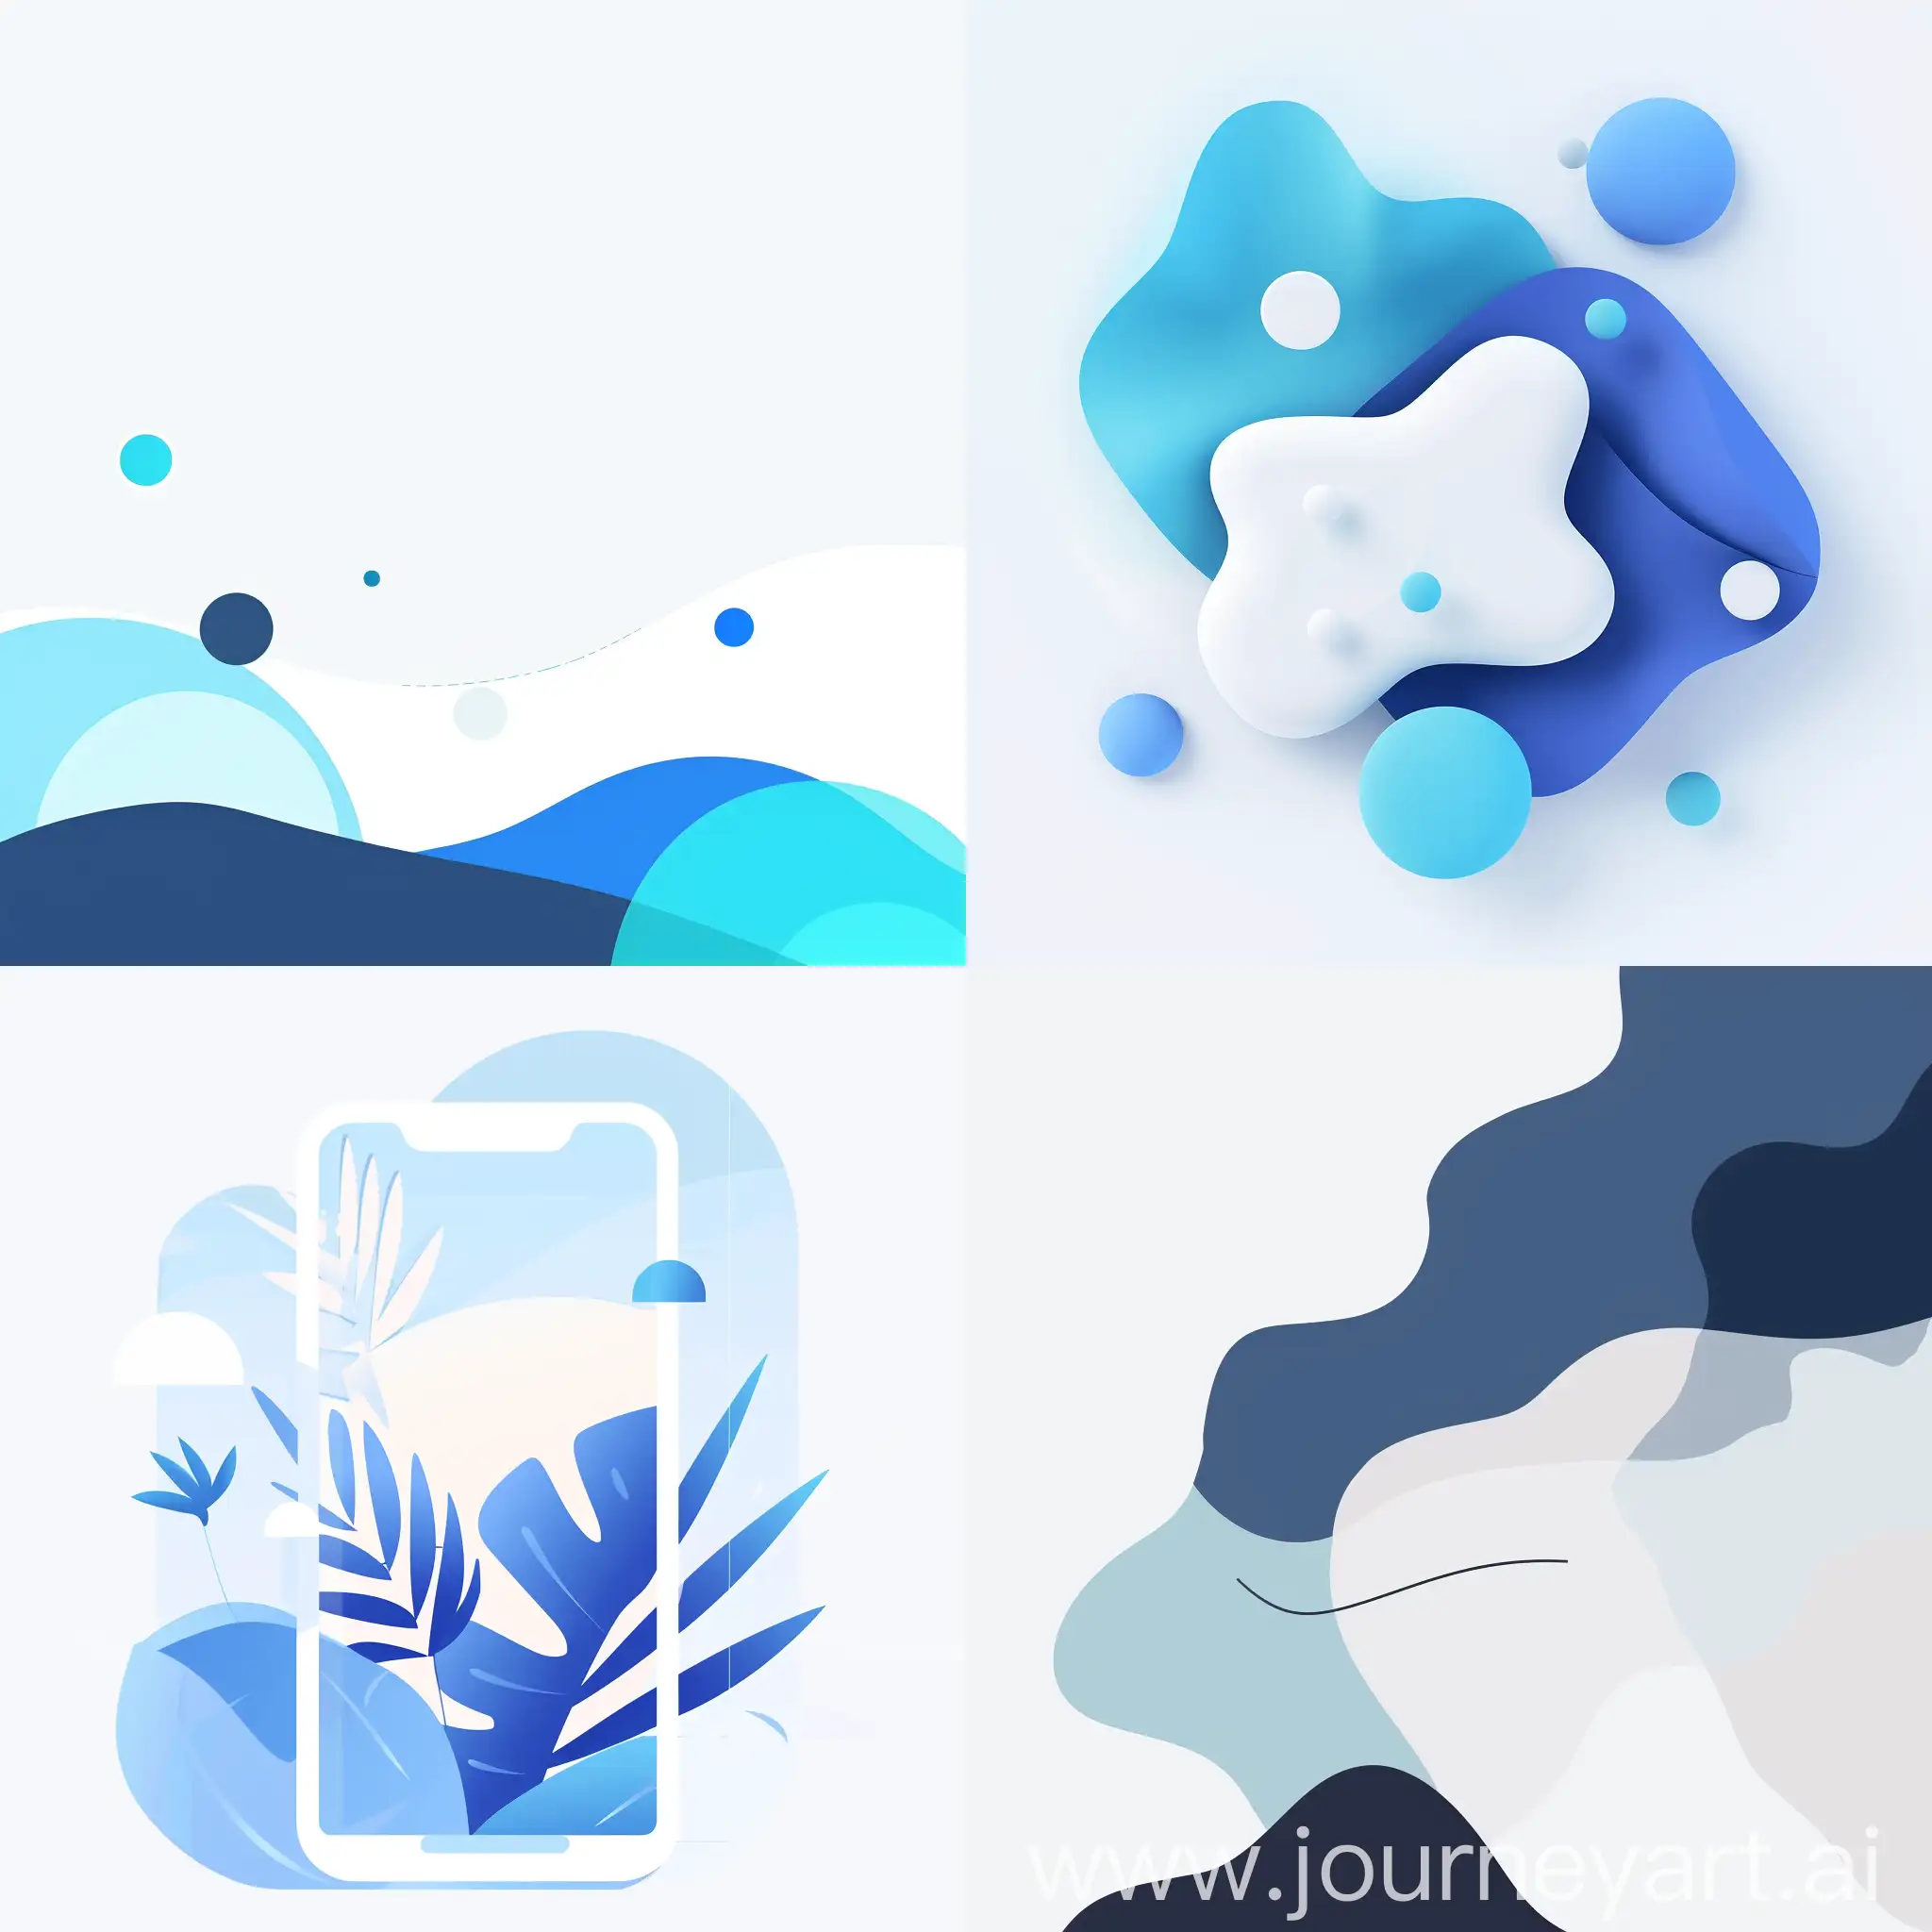 Minimalist-Social-Network-Group-Post-Design-with-Blue-Gradient